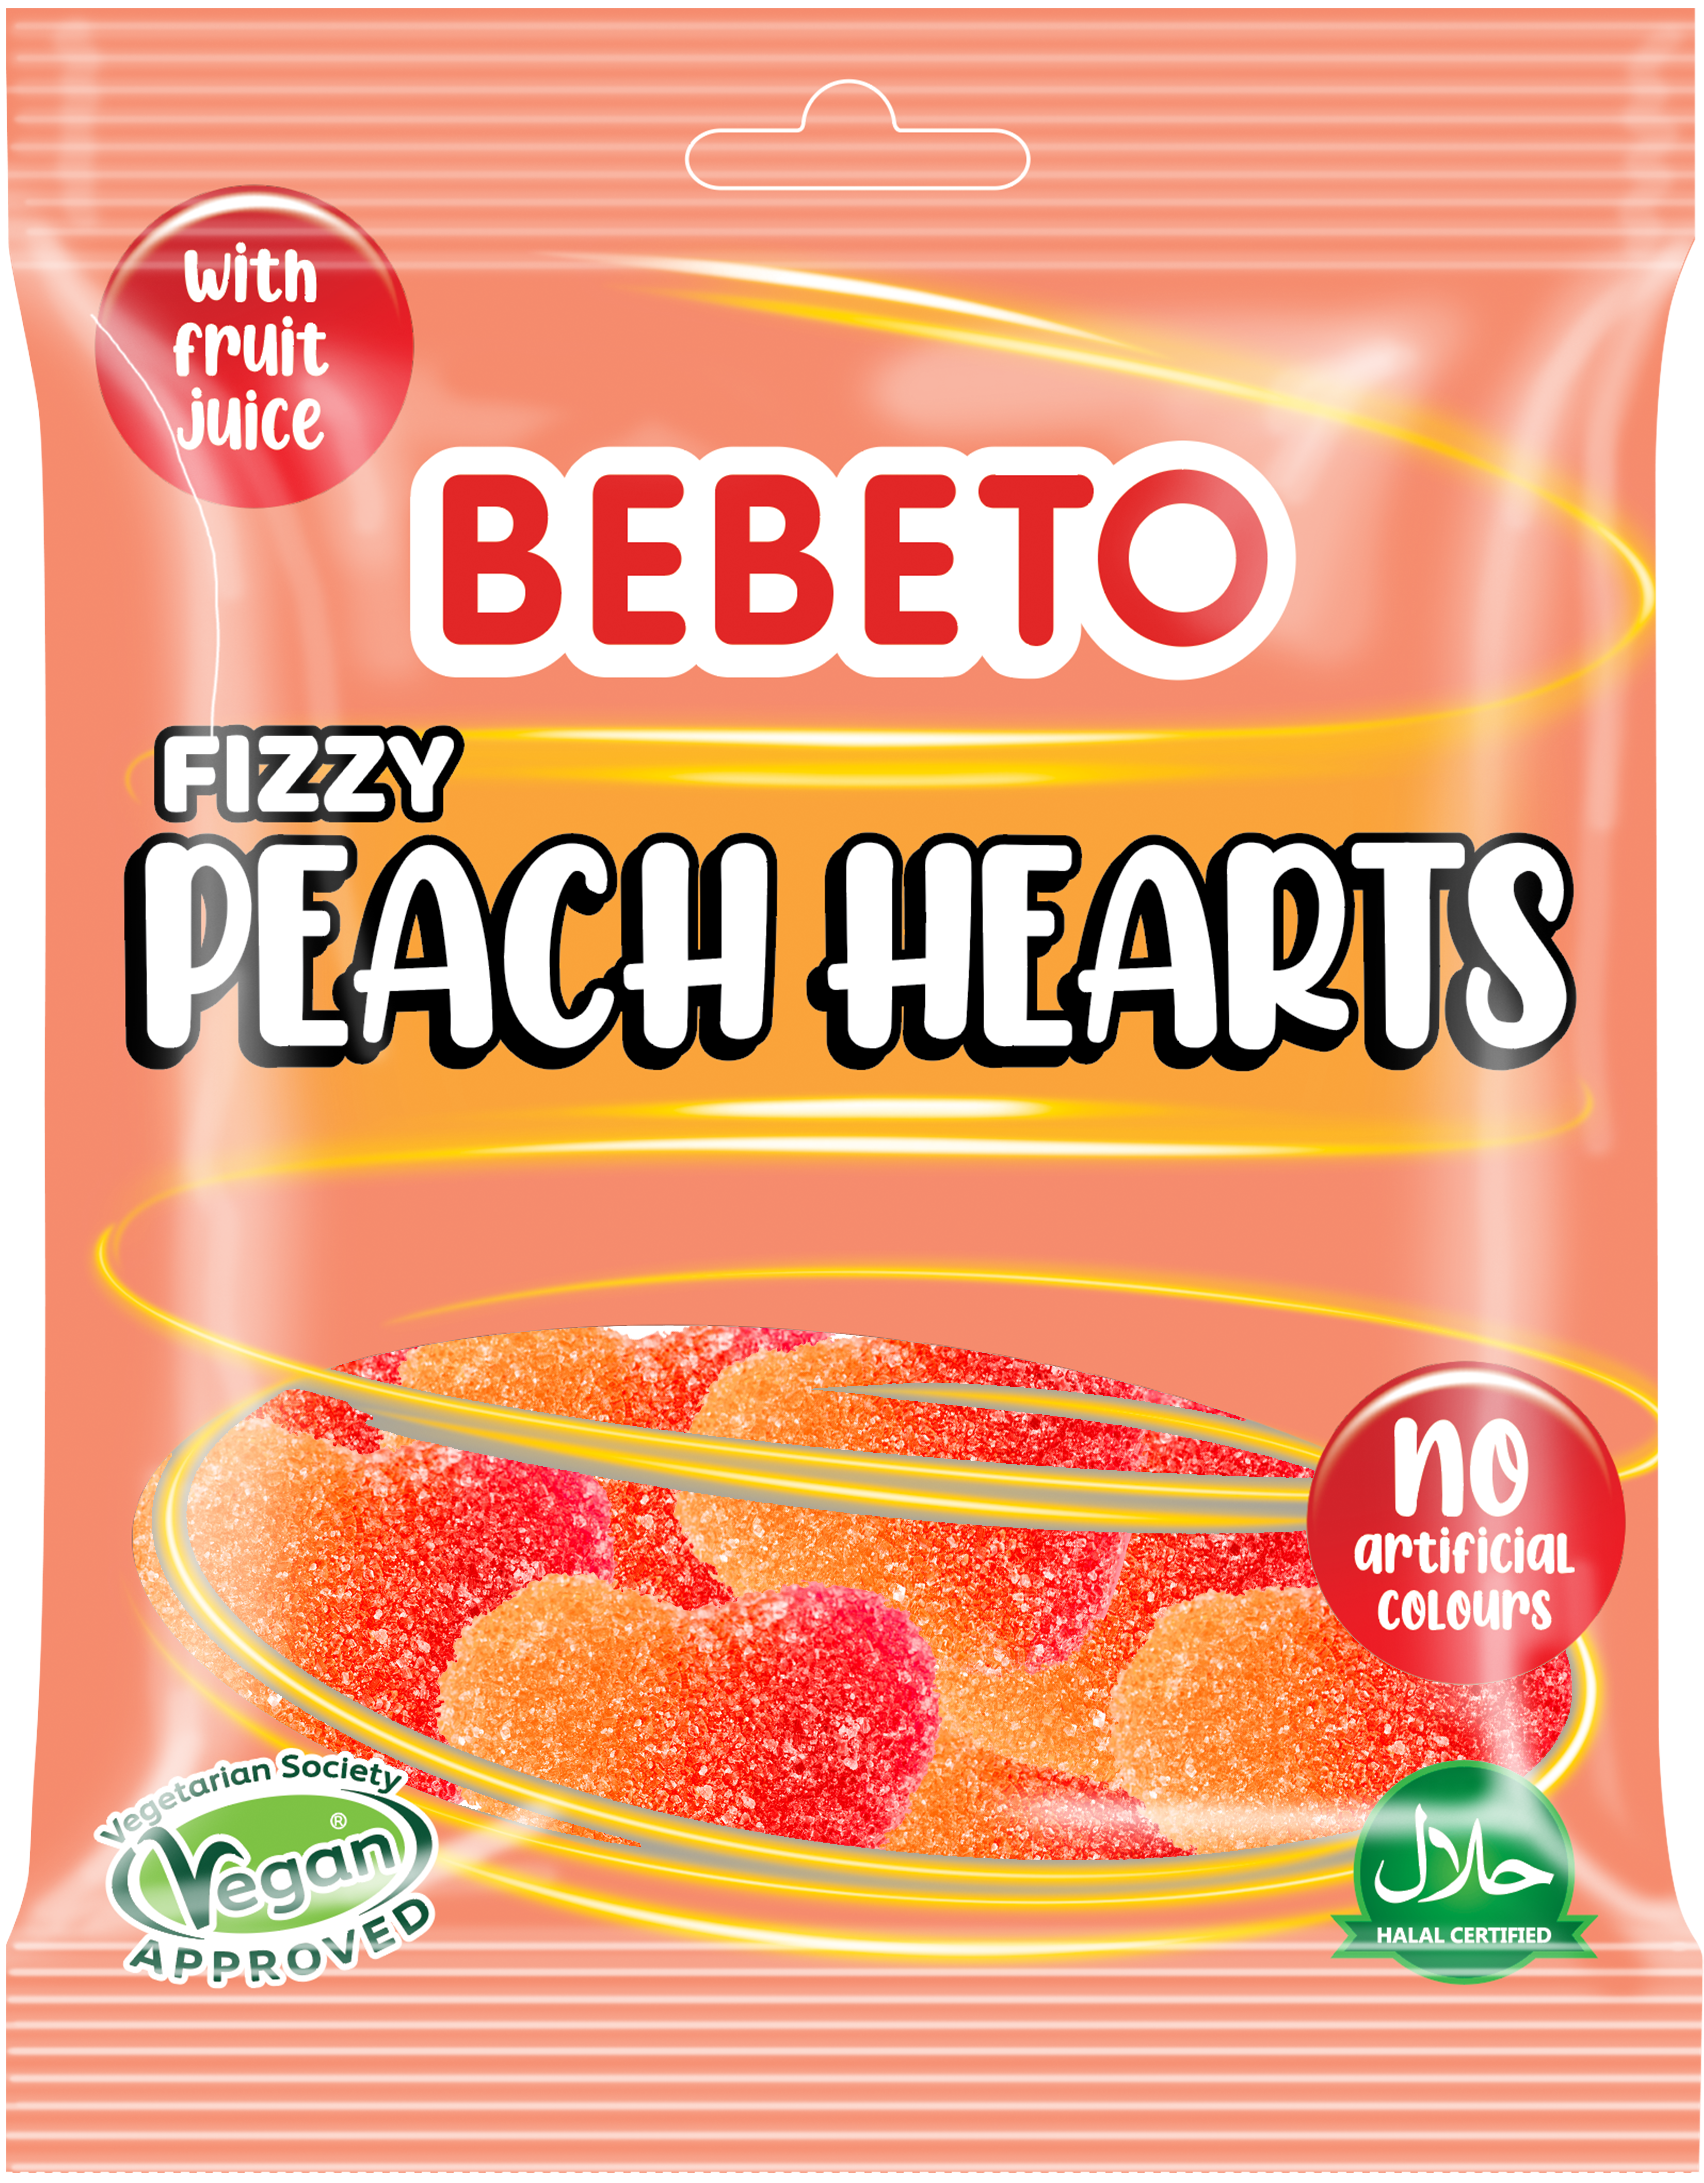 New Fizzy Vegan Hearts and Rings from Bebeto